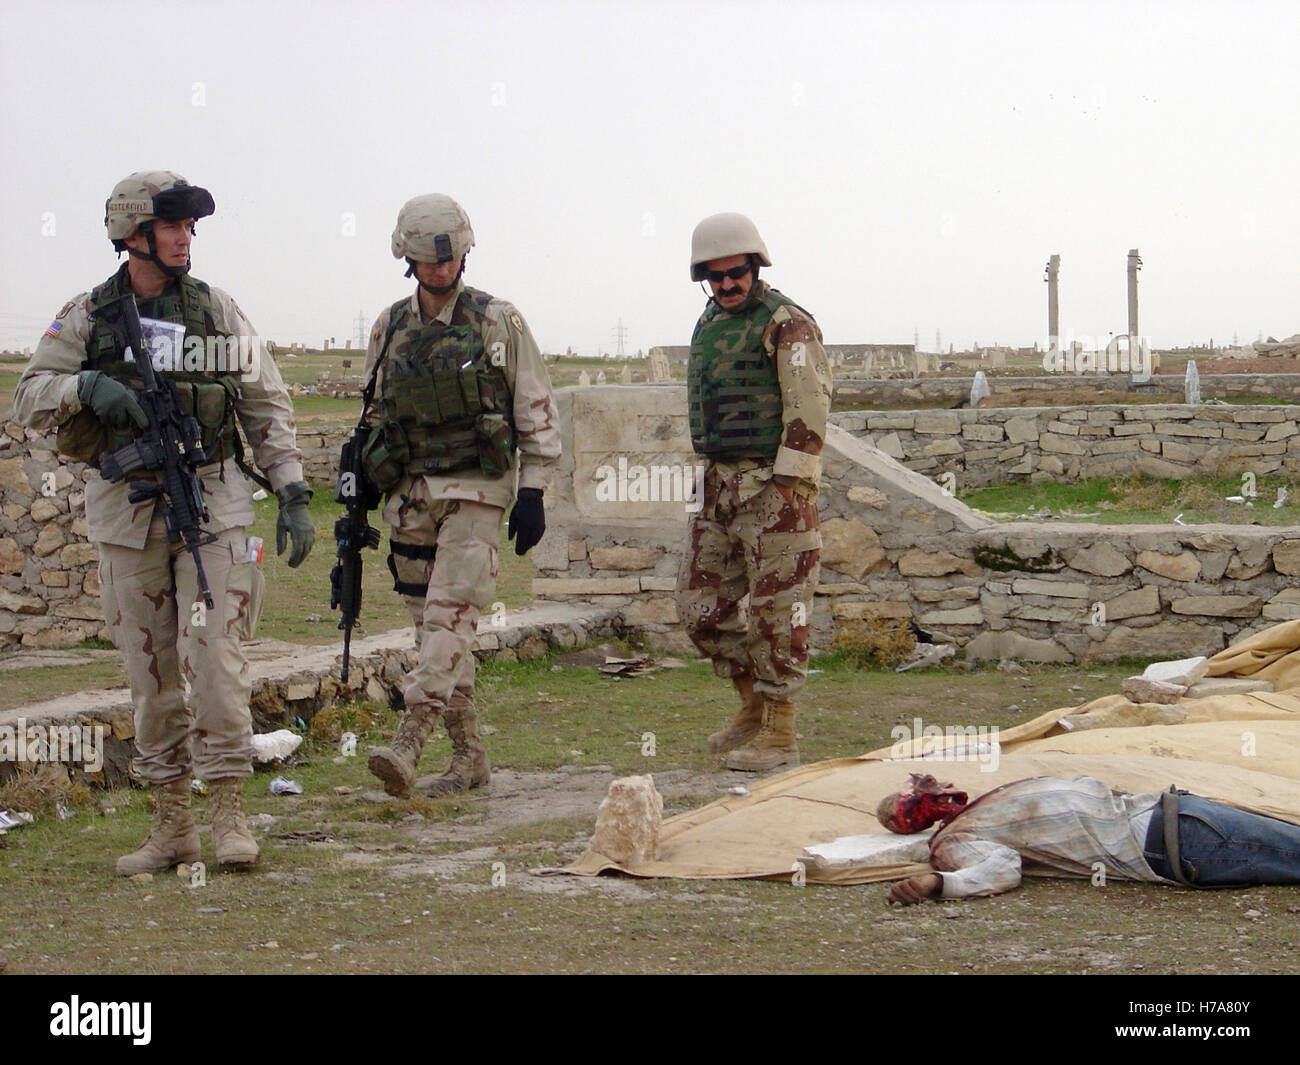 26th November 2004 ING and U.S. soldiers examine a dead body, dumped by insurgents in a cemetery in Mosul, northern Iraq. Stock Photo